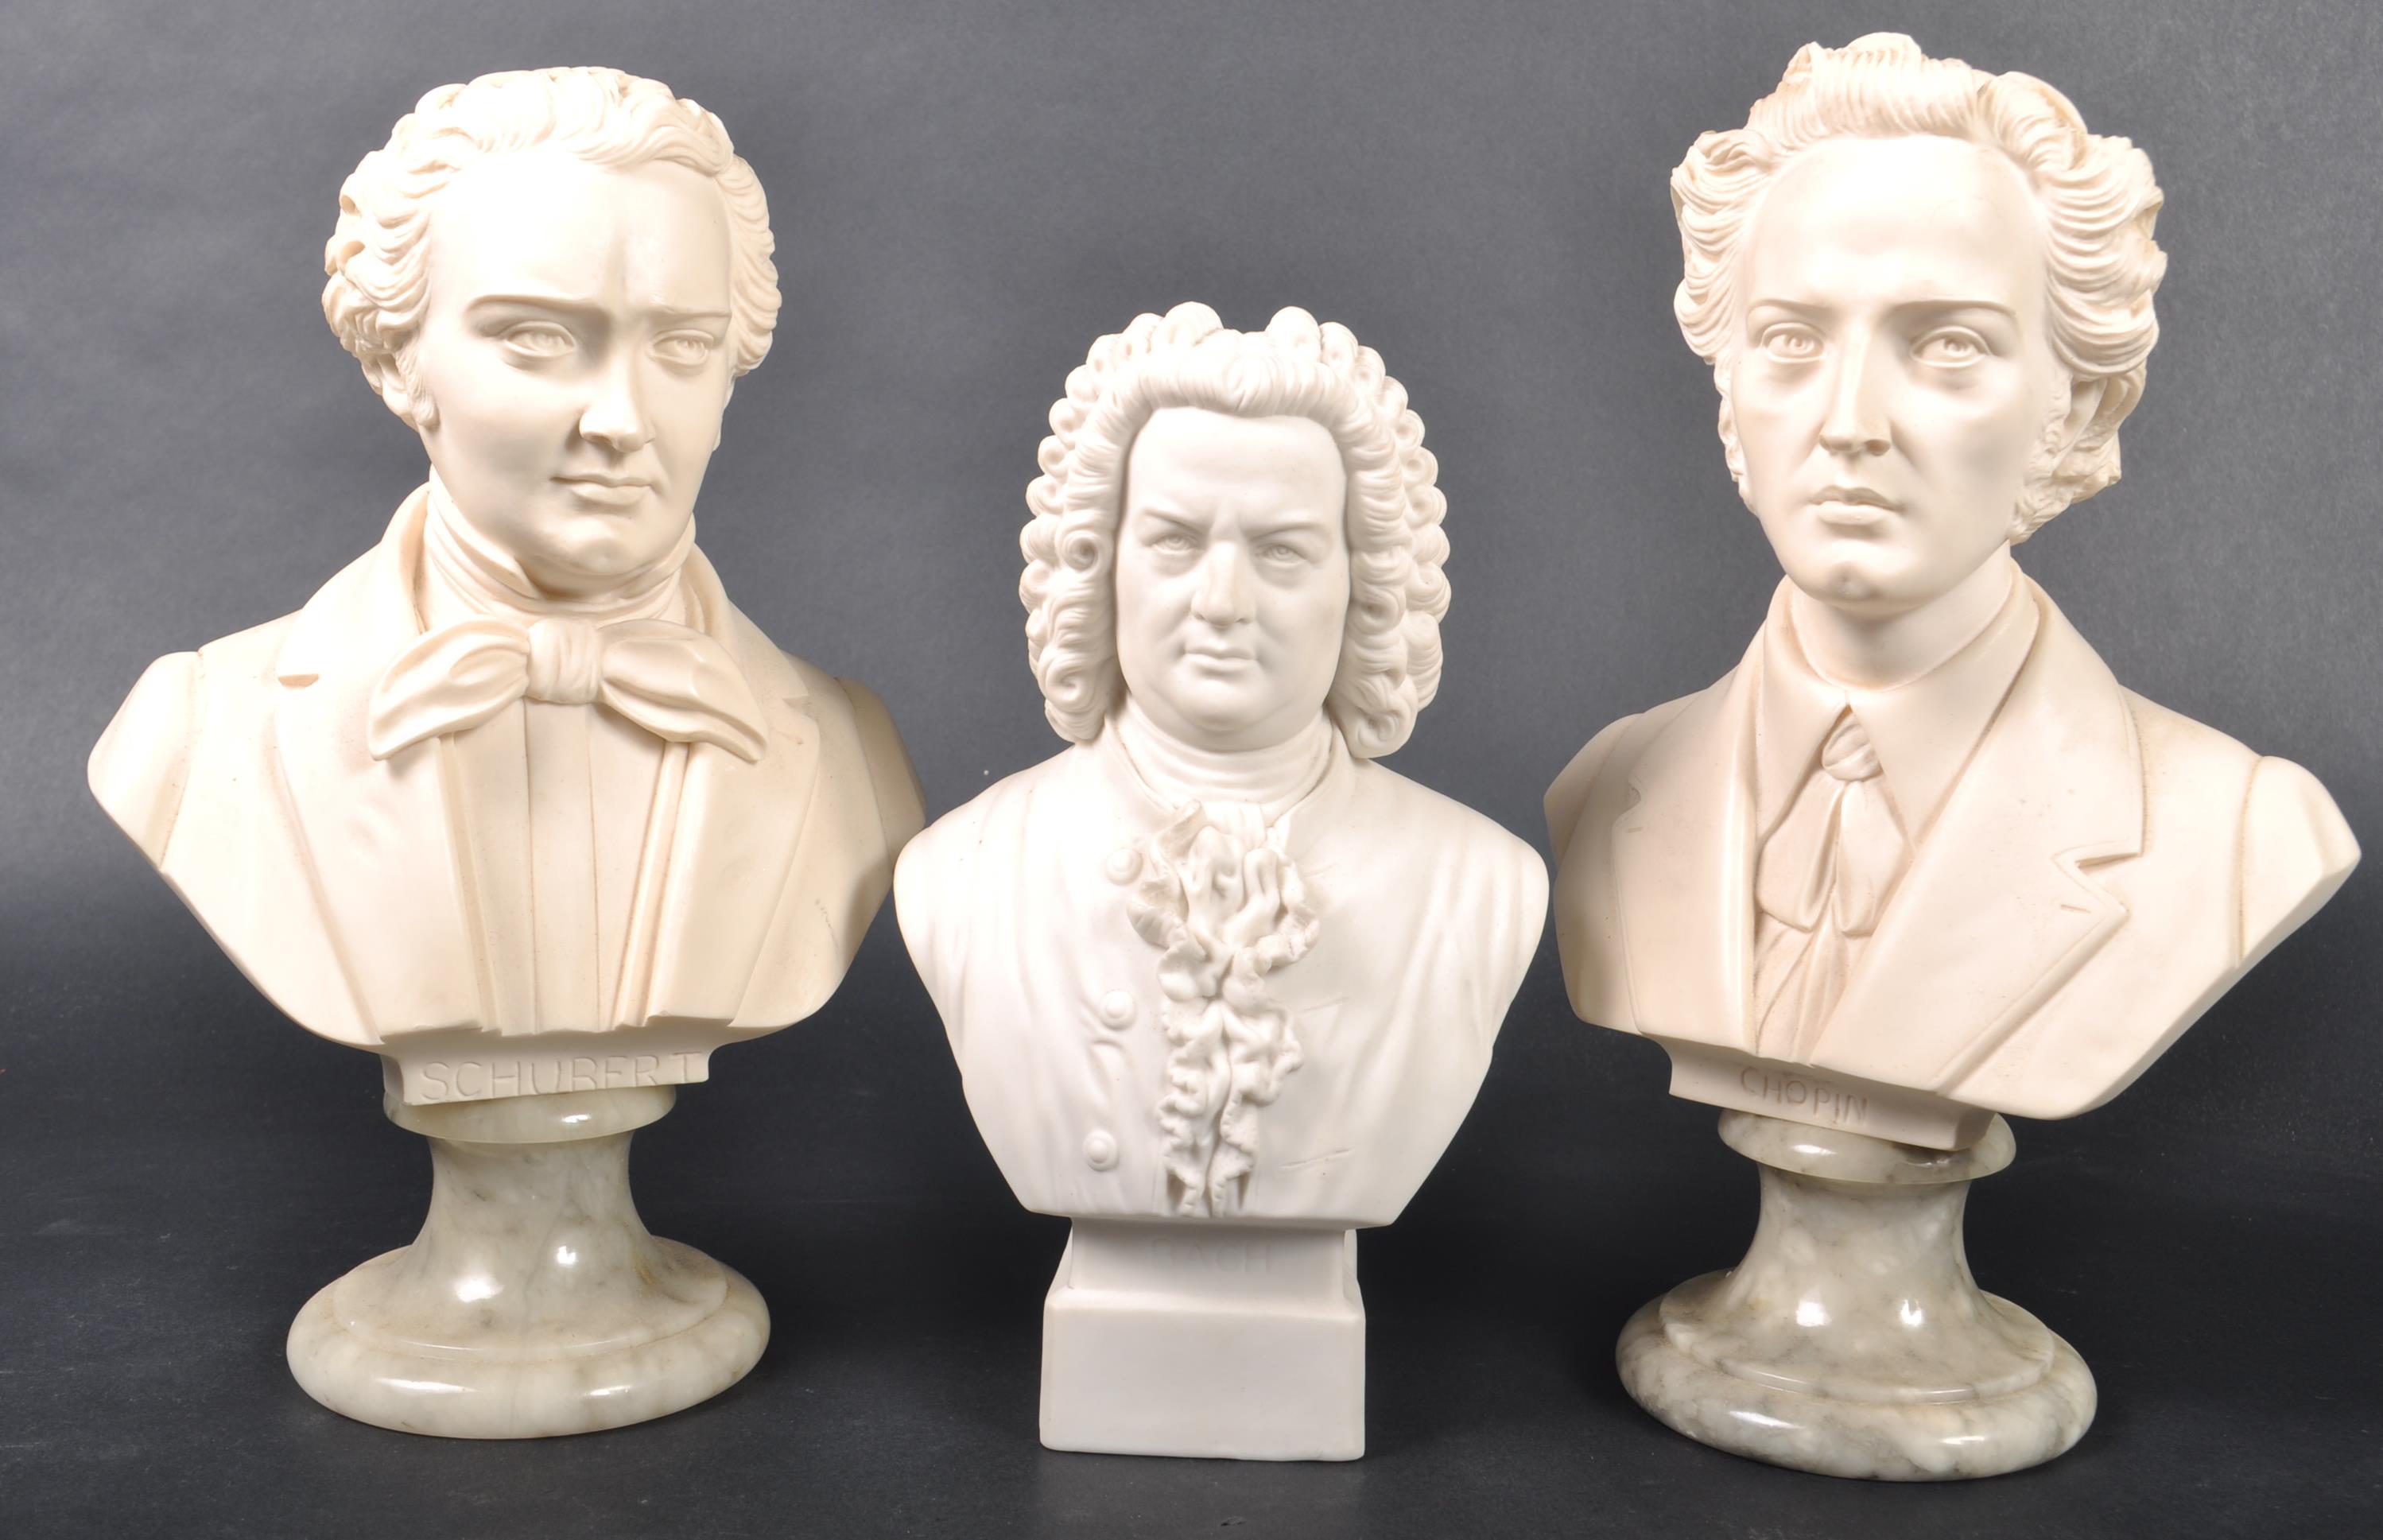 GROUP OF THREE BUSTS DEPICTING FAMOUS COMPOSERS